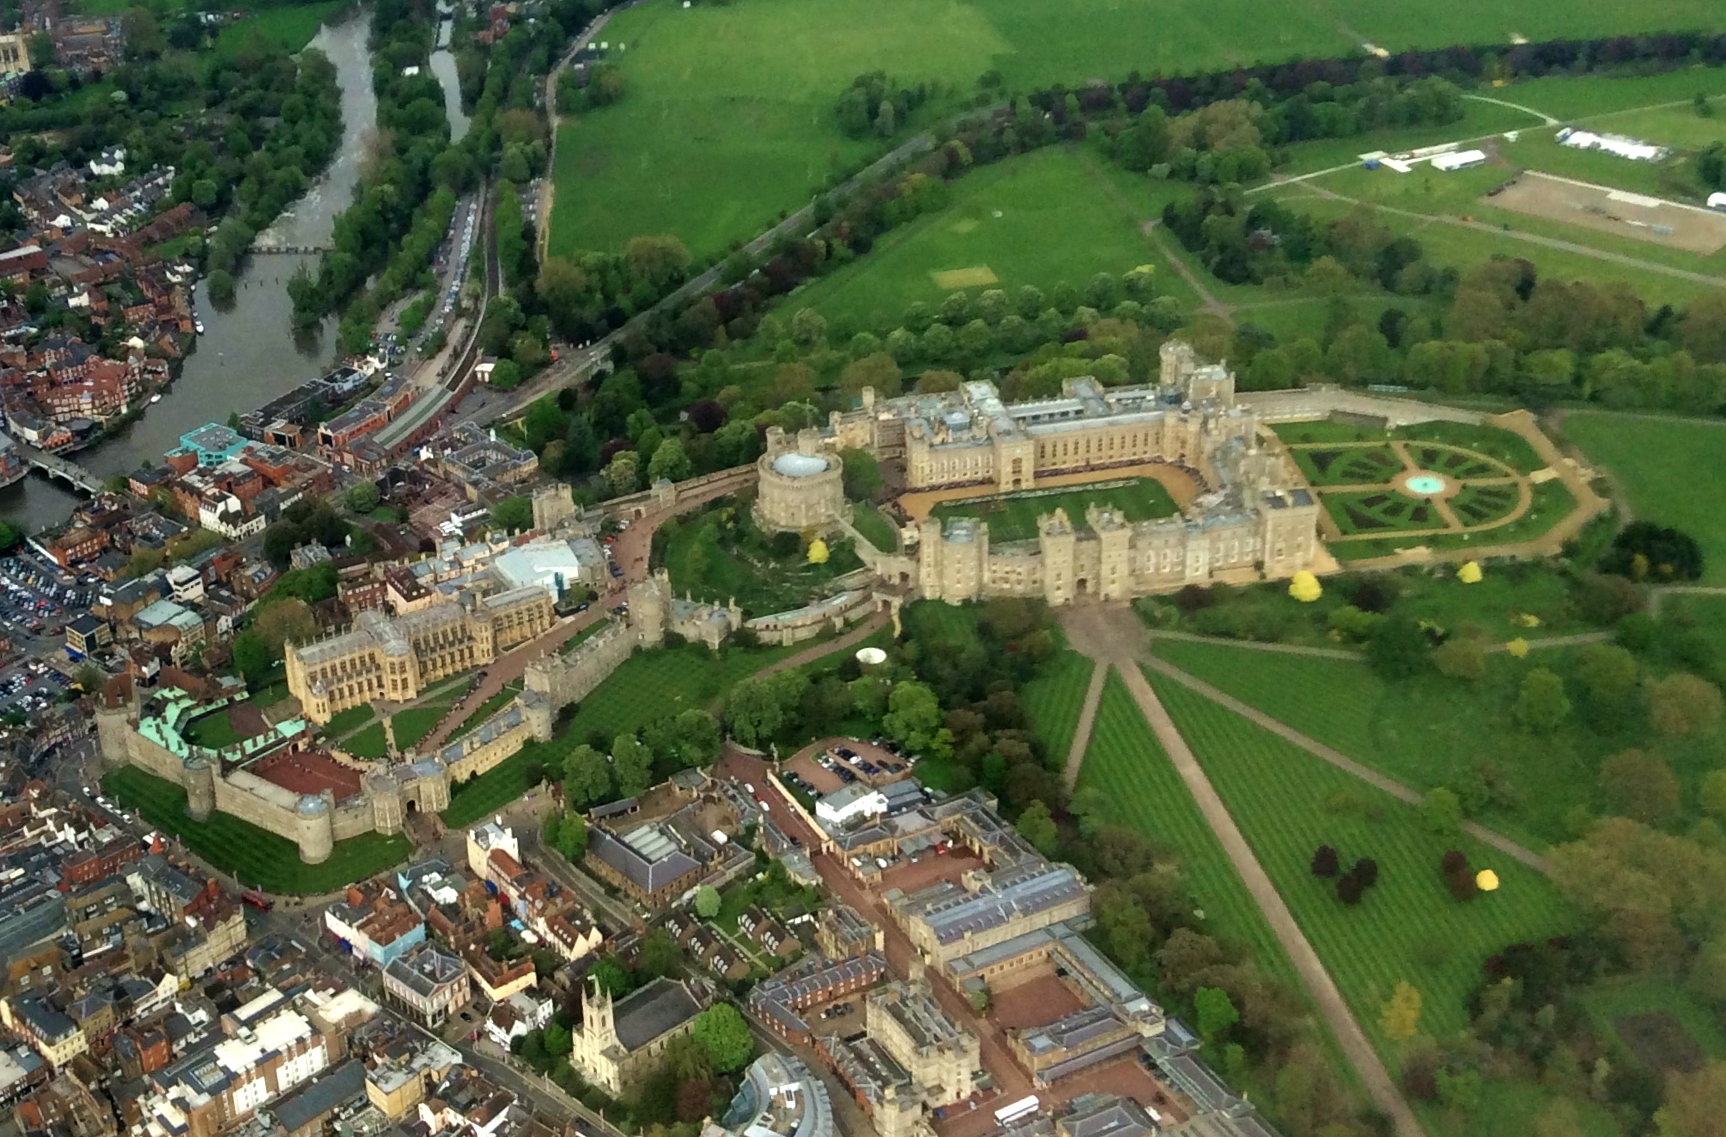 The Queens Scout Award ceremony, seen from the Heathrow flight-path. Observe the tiny row of uniformed Scouts standing on the grass within the Castle's walls.